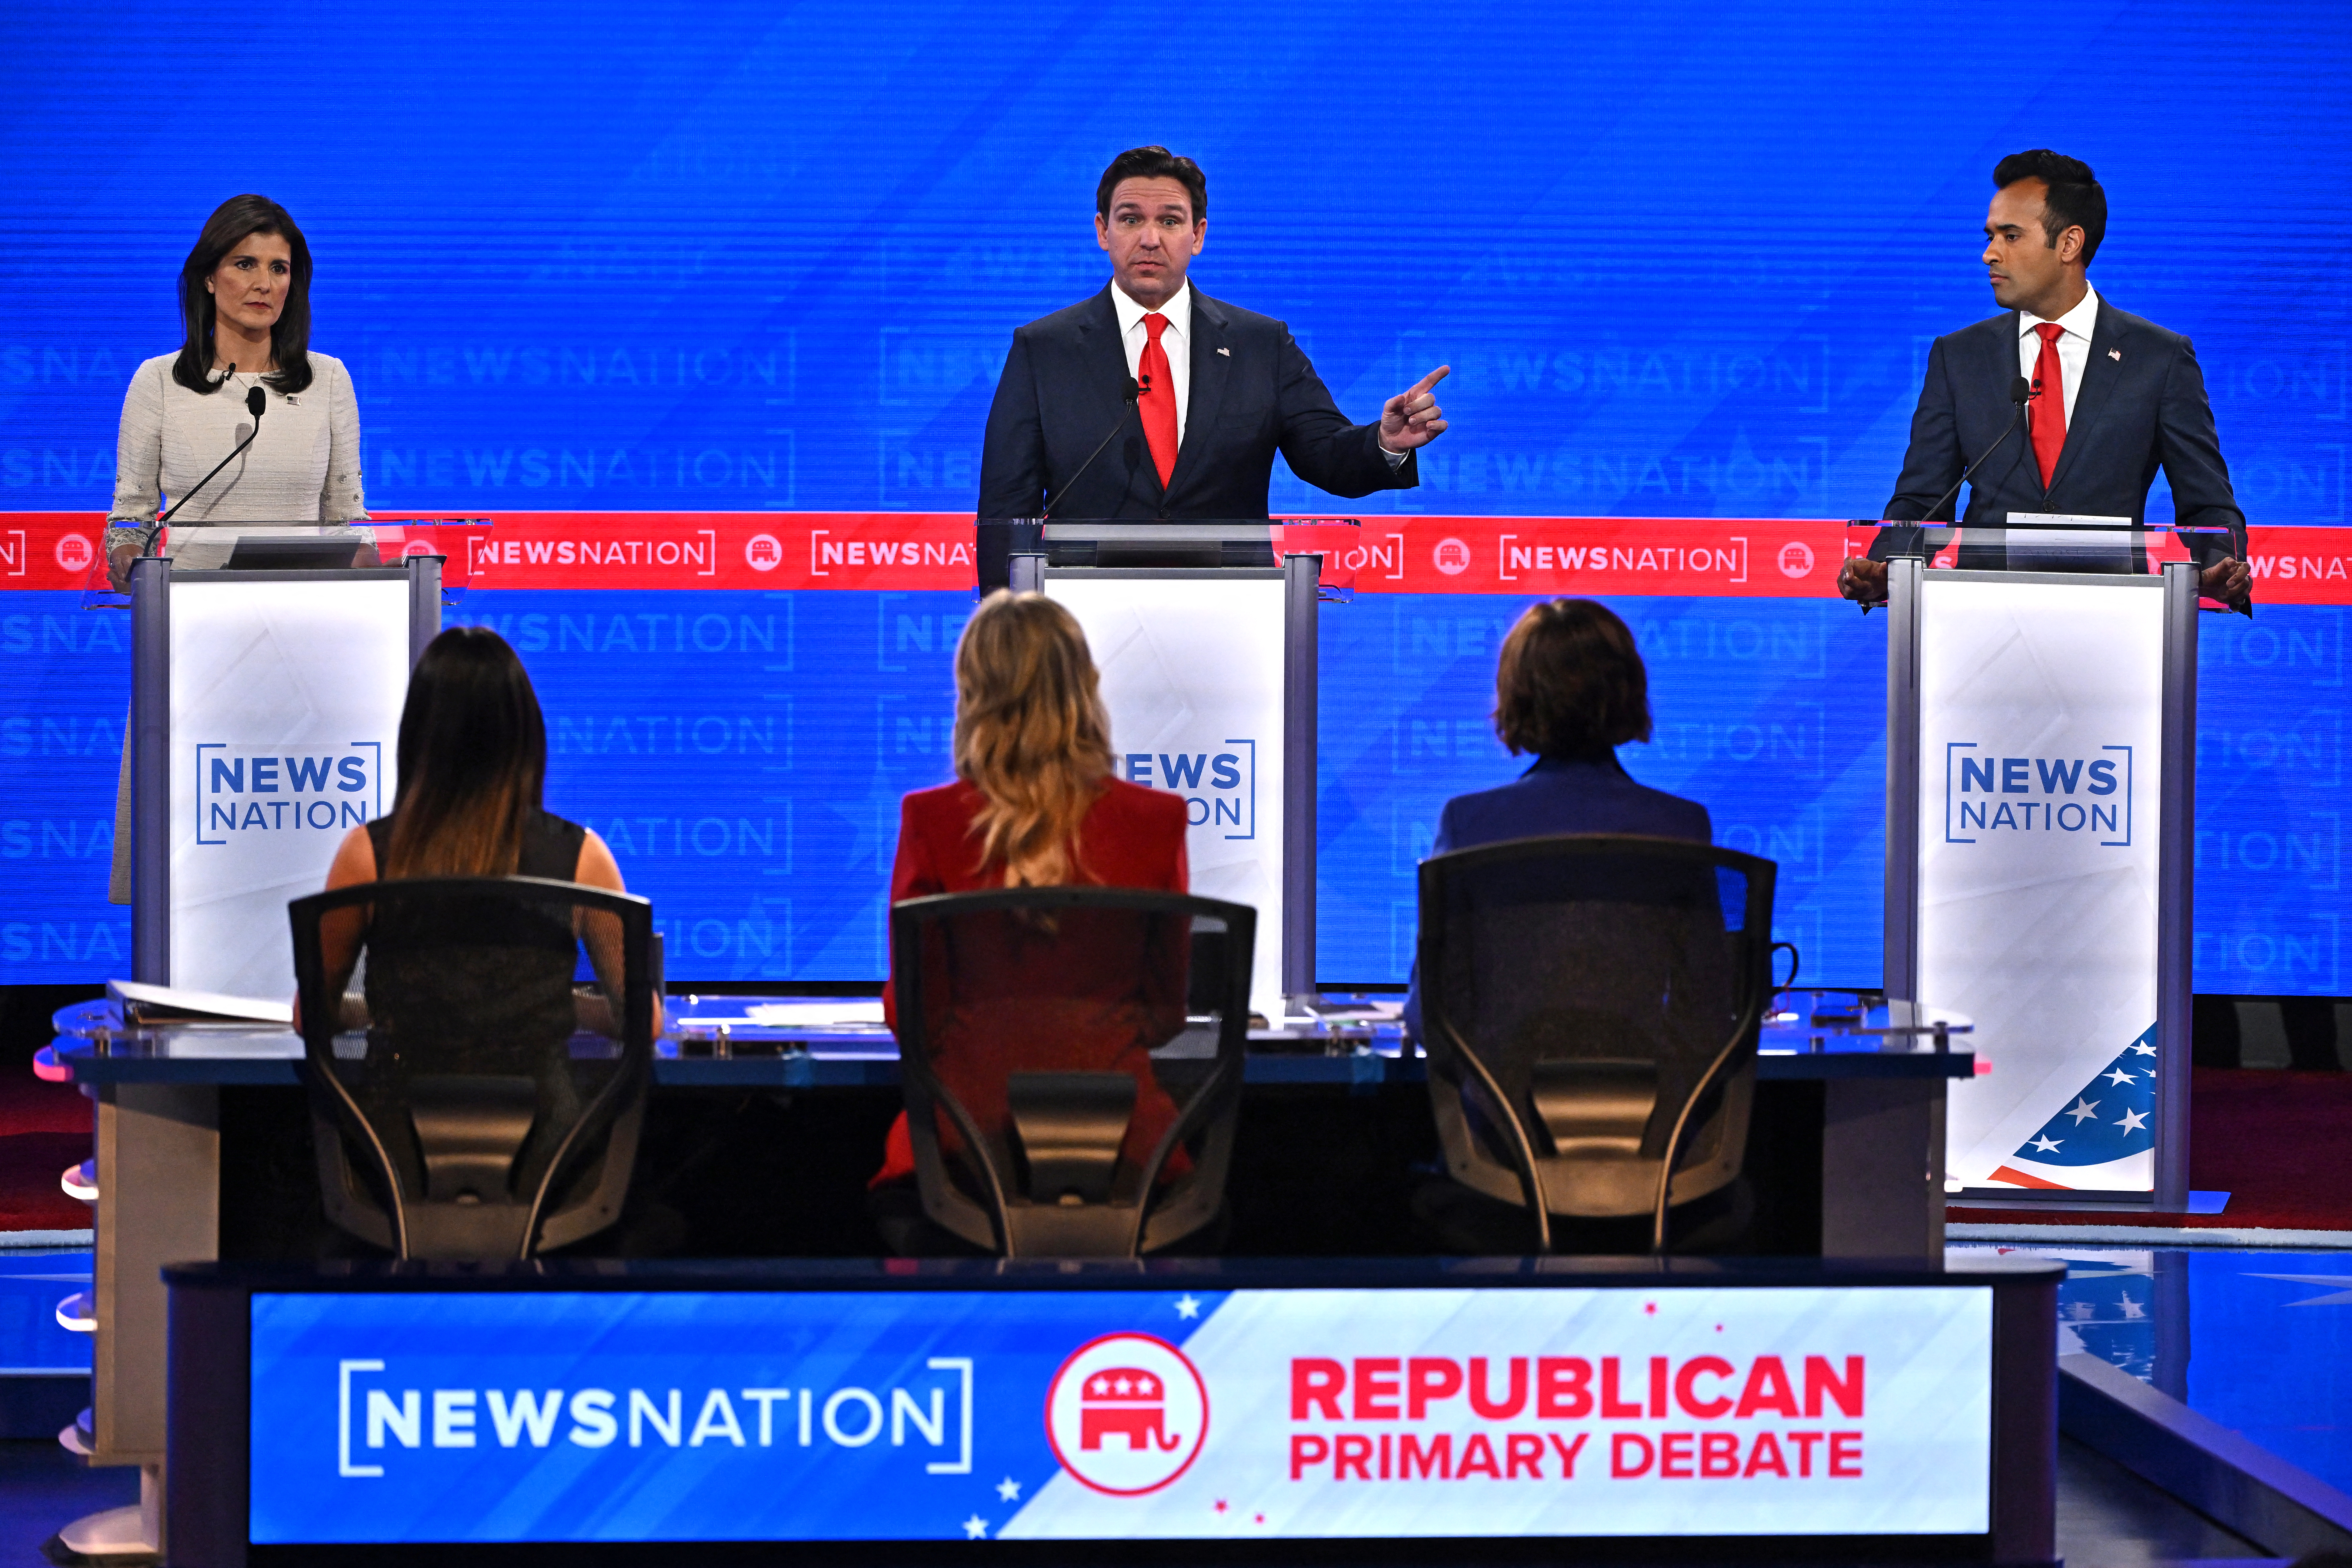 Florida Governor Ron DeSantis (C) speaks, flanked by former Governor from South Carolina and UN ambassador Nikki Haley (L) and entrepreneur Vivek Ramaswamy, during the fourth Republican presidential primary debate at the University of Alabama in Tuscaloosa, Alabama, on December 6, 2023. (Photo by Jim WATSON / AFP) (Photo by JIM WATSON/AFP via Getty Images)